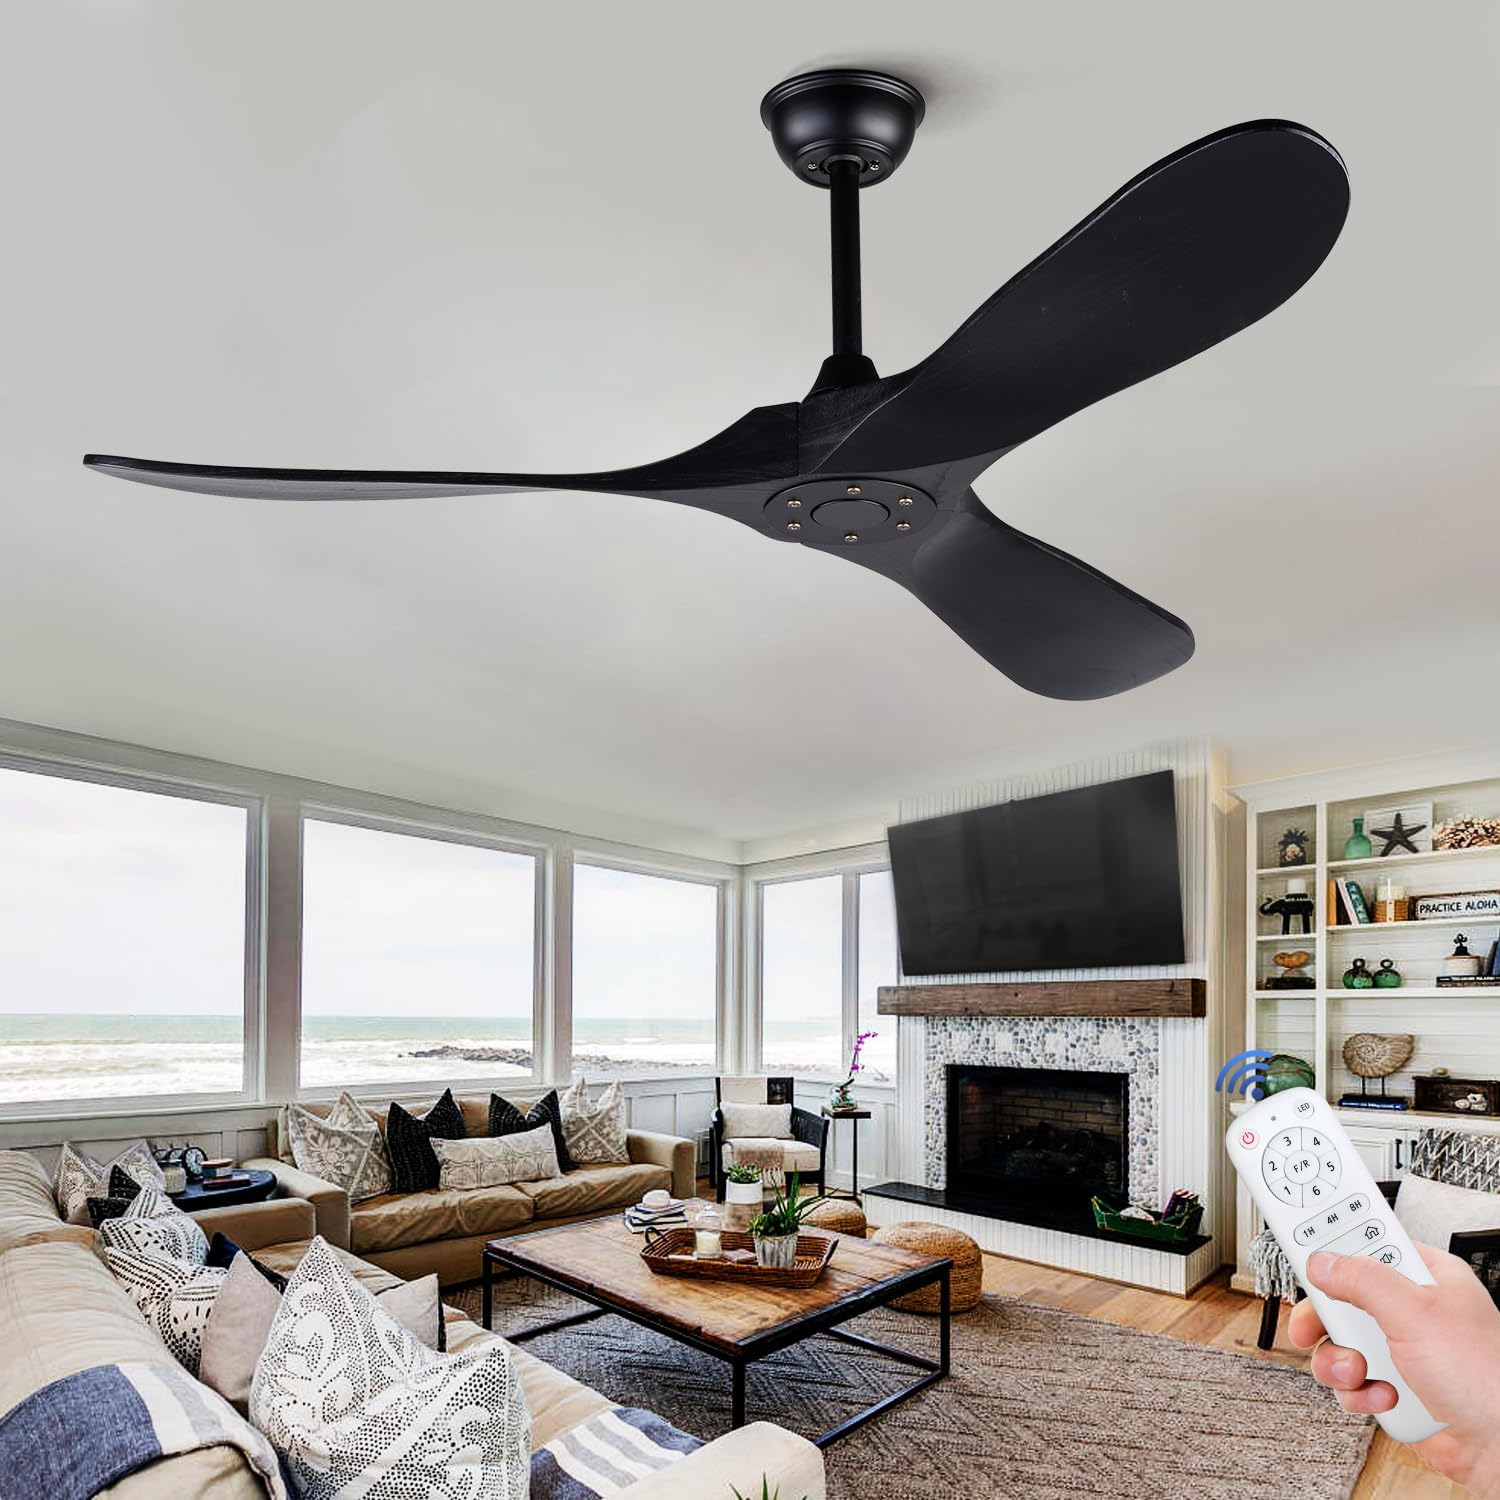 BOJUE 52 Wood Ceiling Fan Without Light Remote Control, Low Profile Ceiling Fan Indoor Outdoor with 3 blade for Patio Living Room, Bedroom, Office, Summer House, Etc (Black Blades)